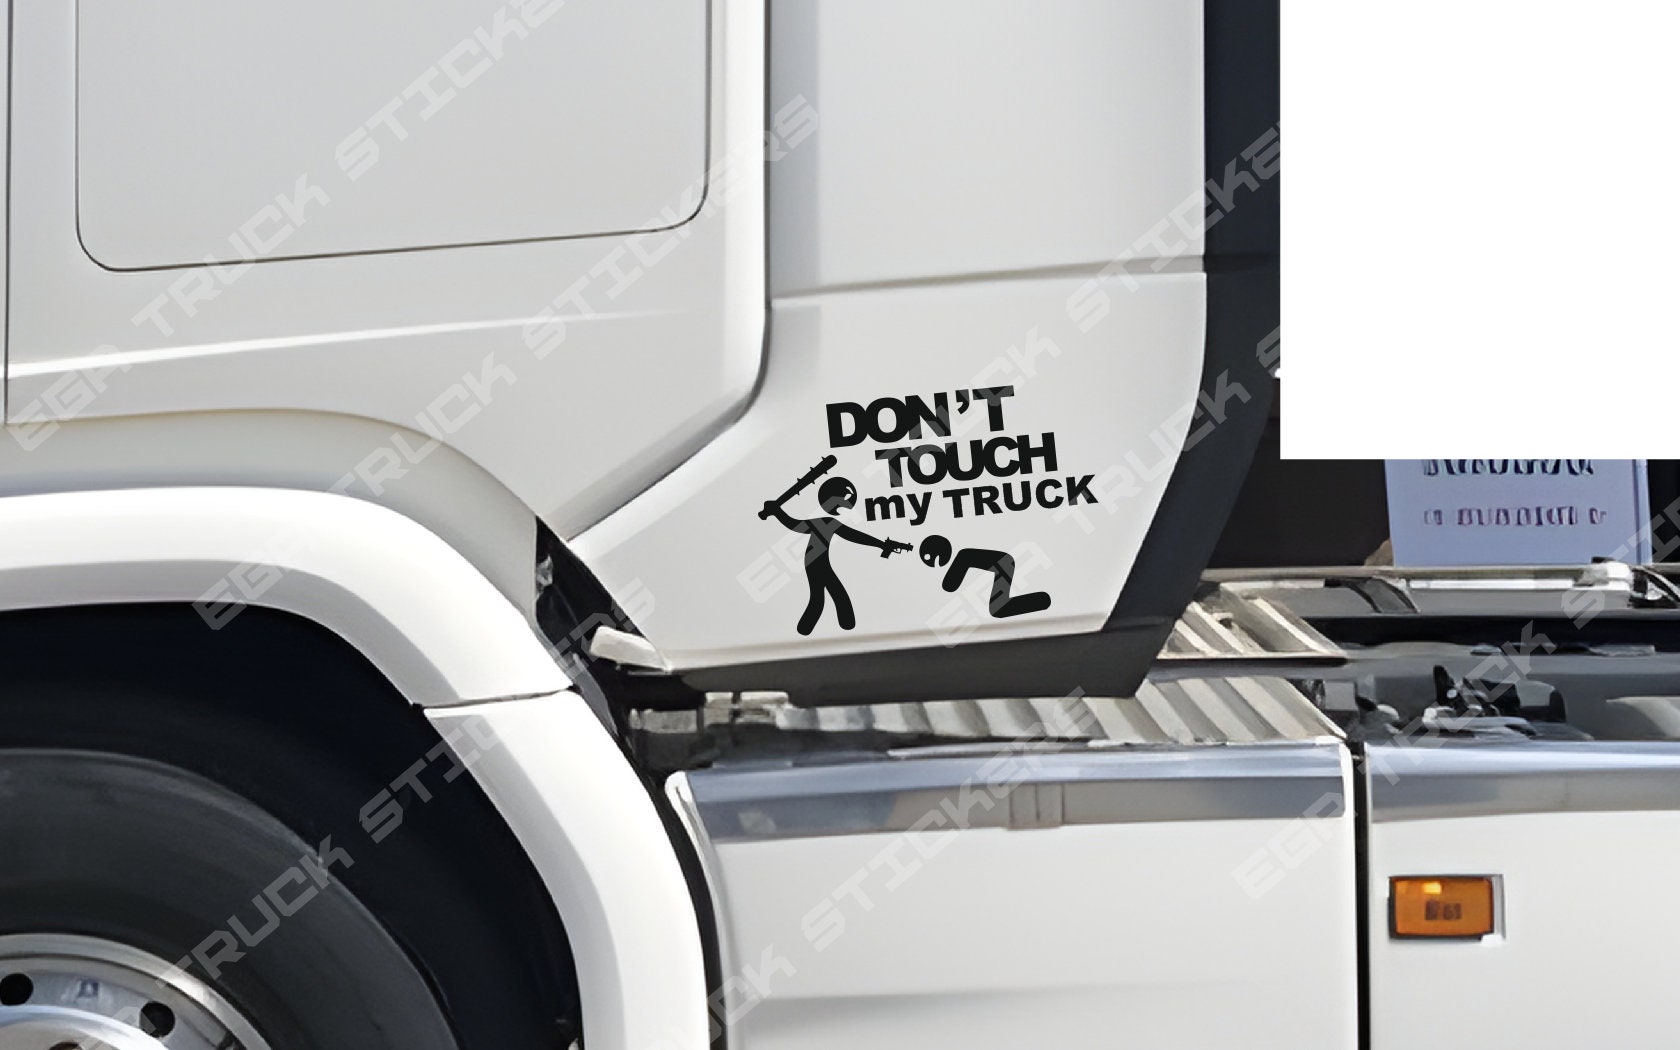 Car stickers FOR SCANIA G450 door decoration personalized creative special  decals